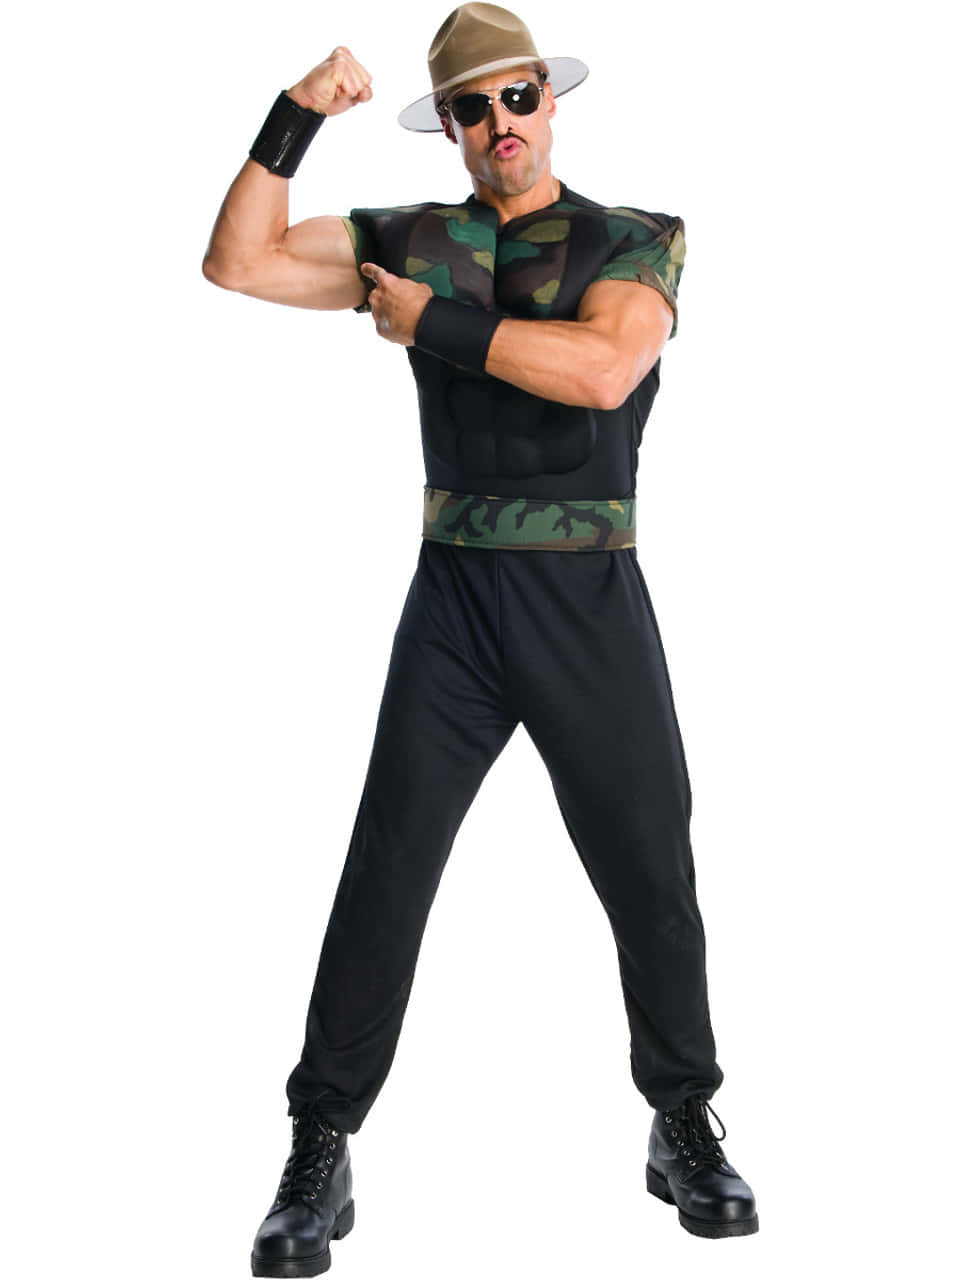 Sgt Slaughter Iconic Camouflage Wrestling Costume Wallpaper